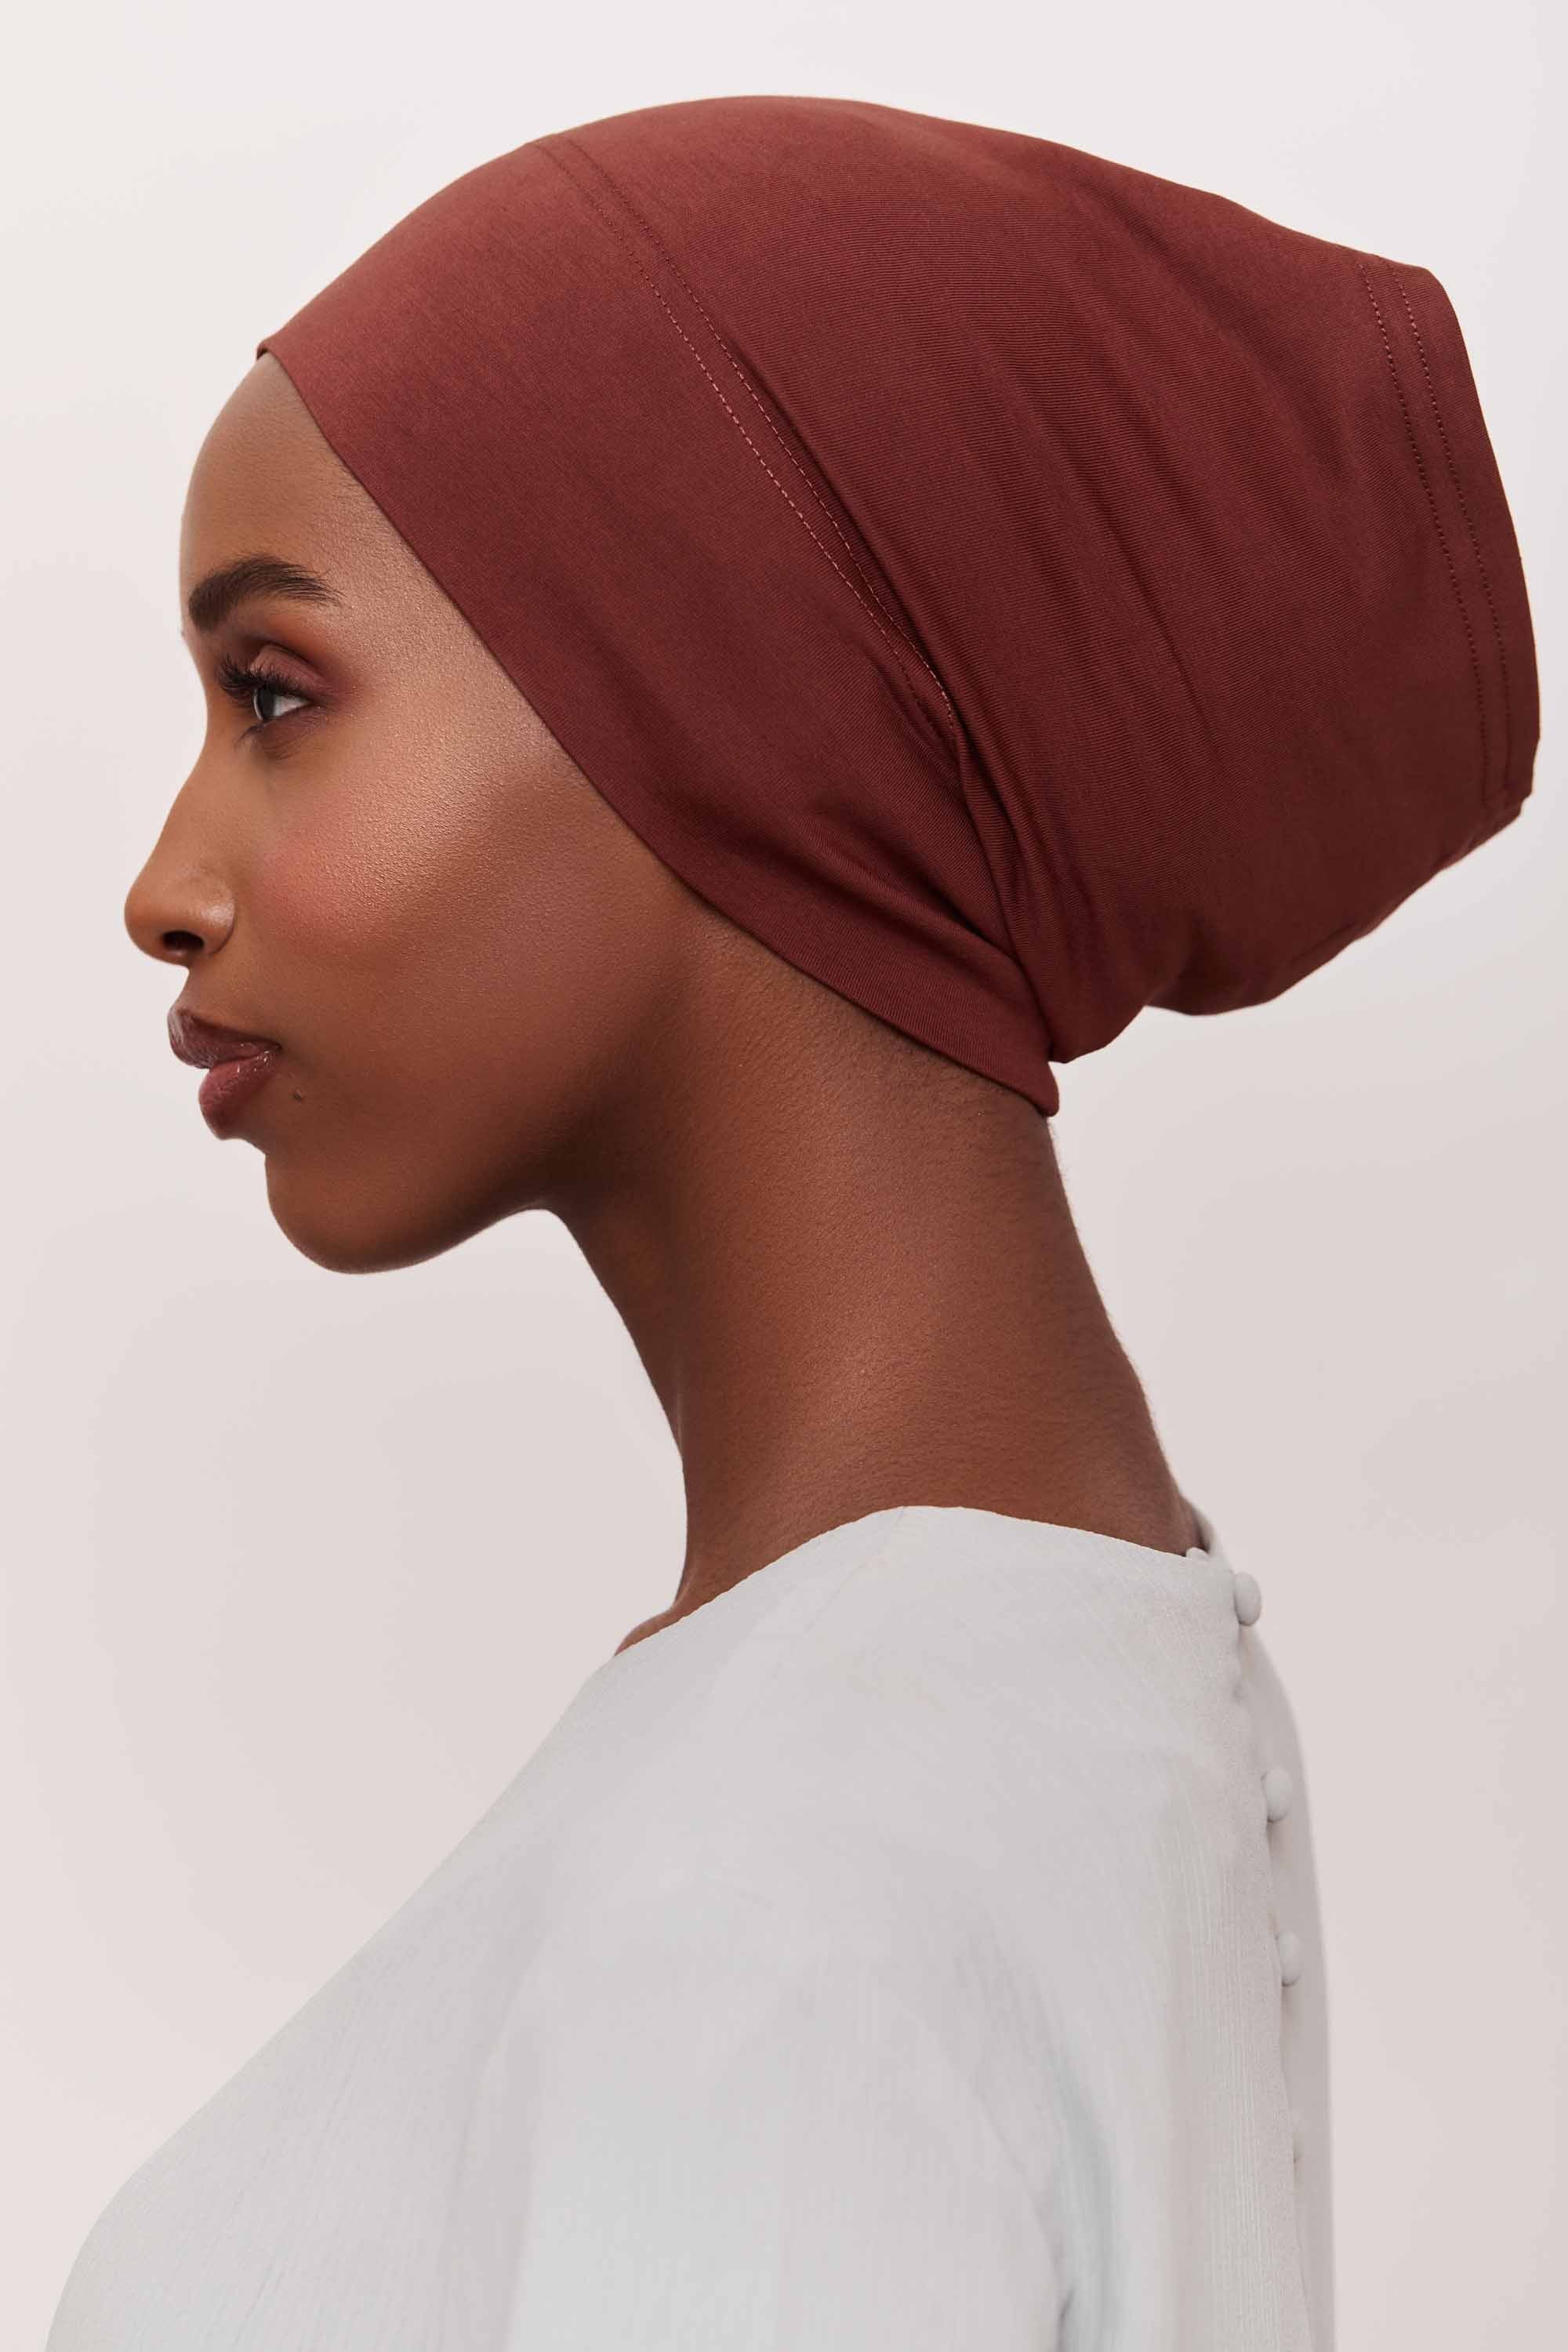 Cotton Undercap - Chocolate Fondant Extra Small Accessories Veiled Collection 